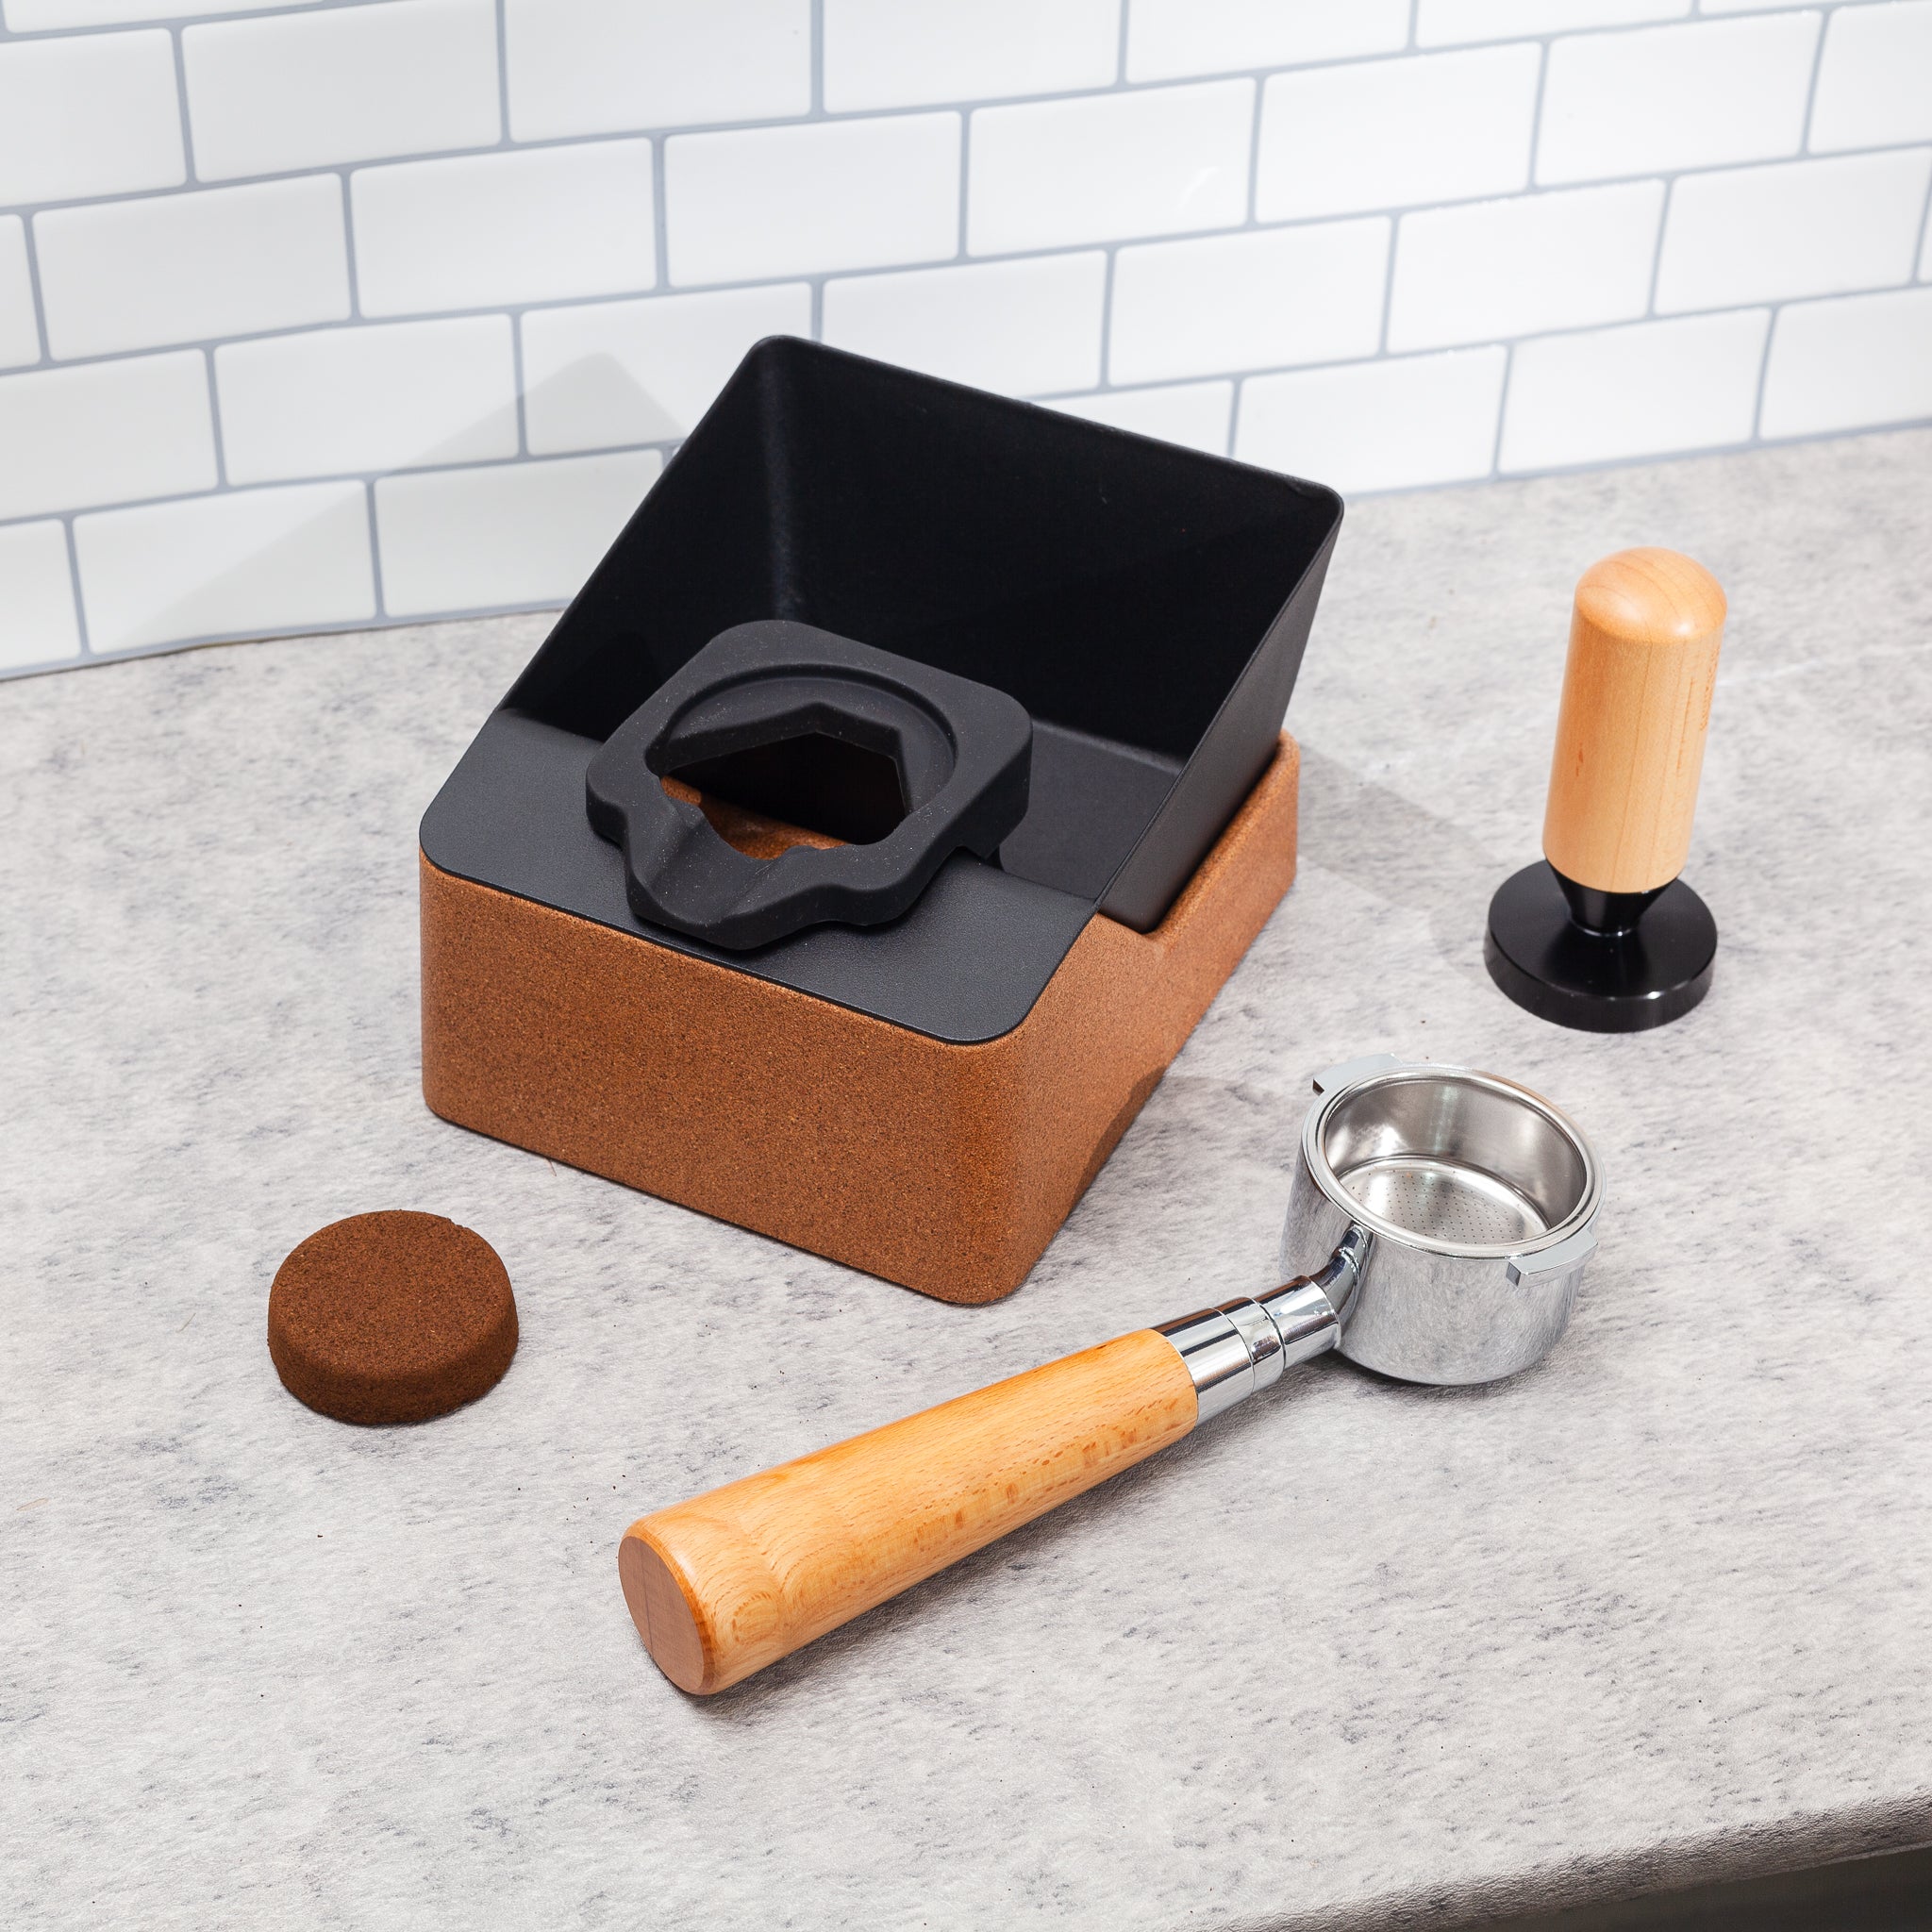 A Knock Box + Tamping Station All-In-One